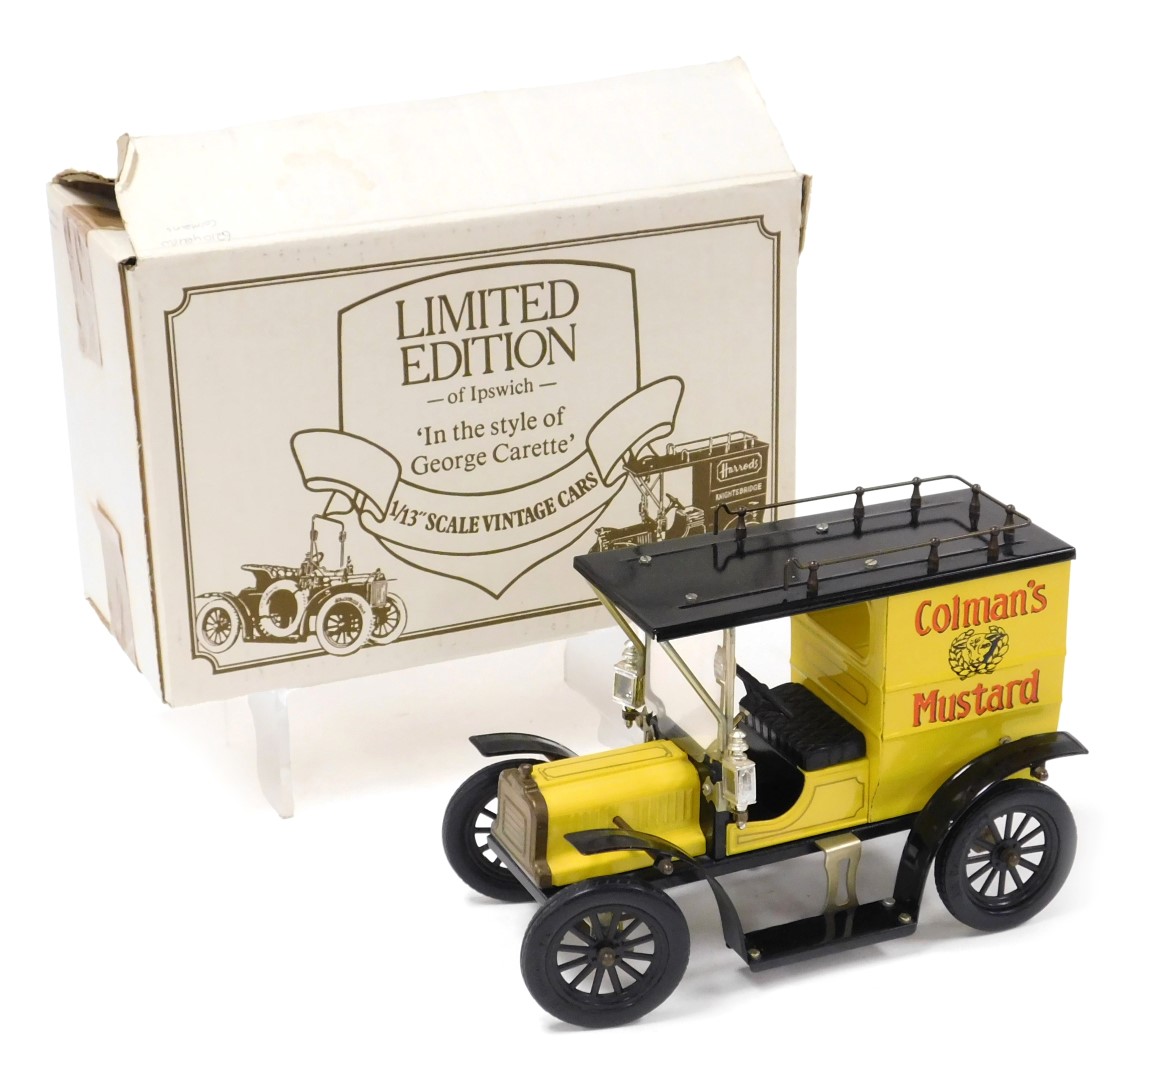 A limited edition of Ipswich vintage model Colman's mustard van, in the style of George Carette, sca